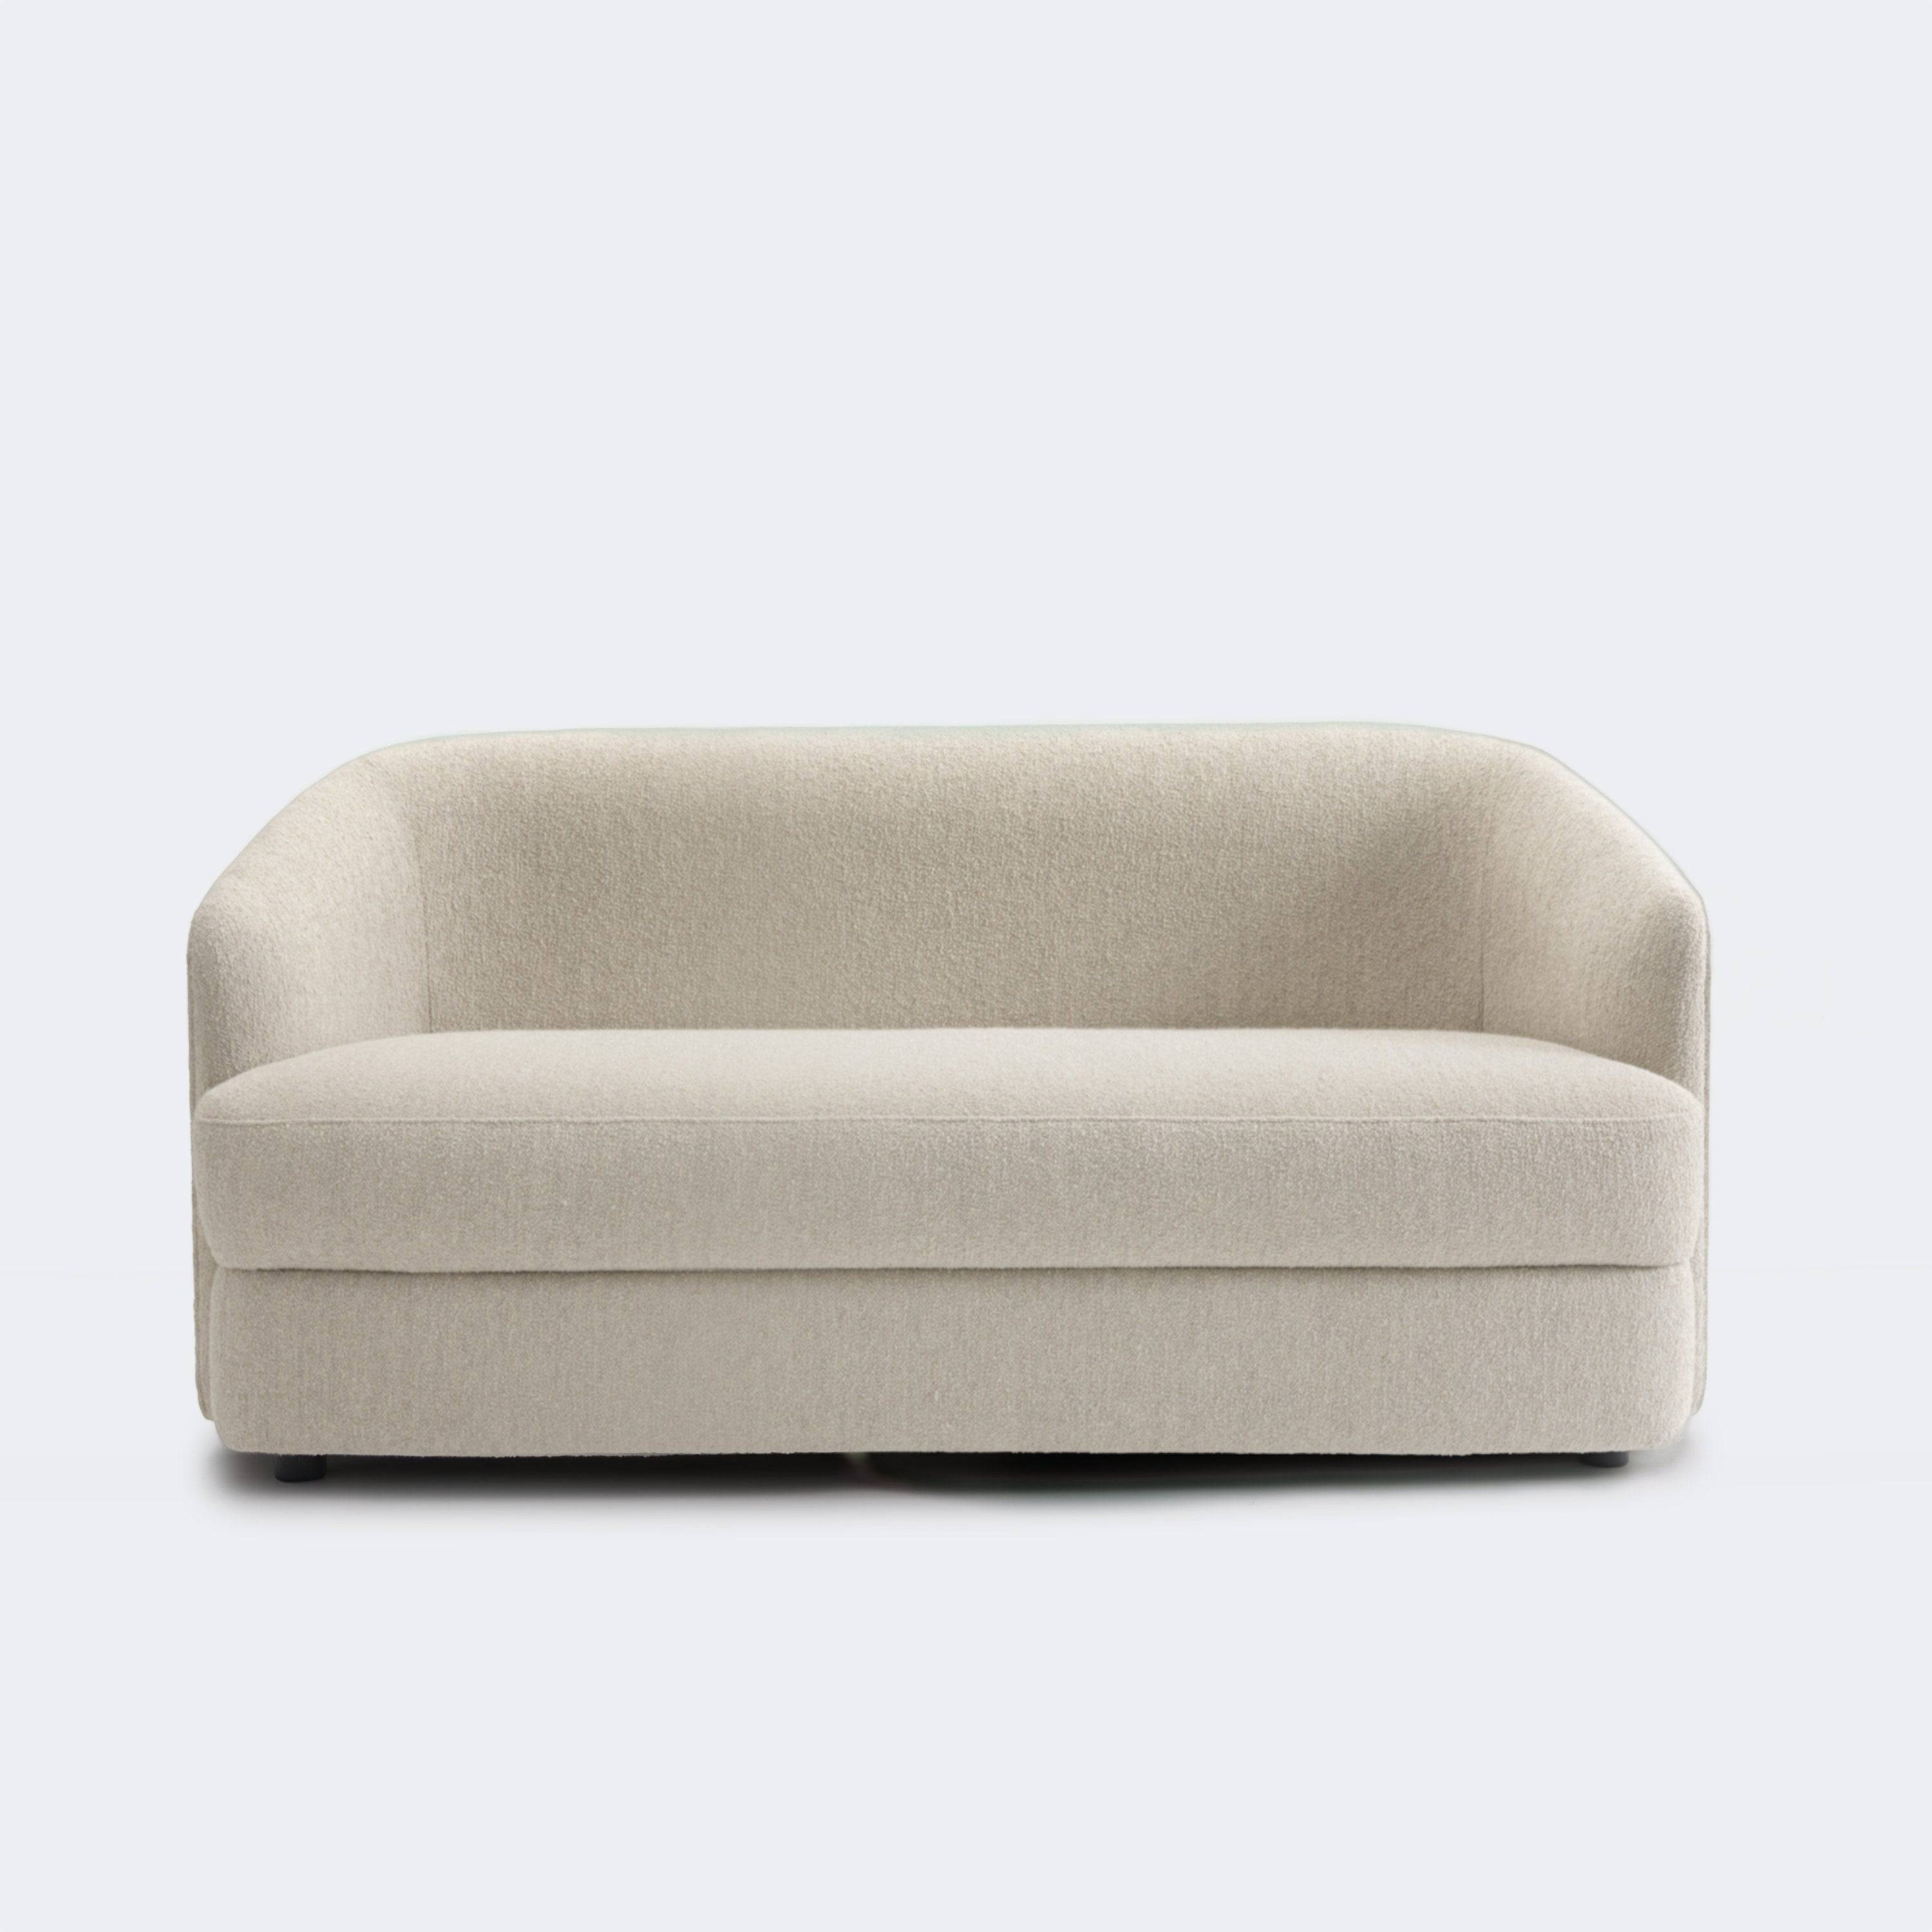 New Works Covent Sofa Deep, 2 Seater Off-White - KANSO#Upholstery Price Category D